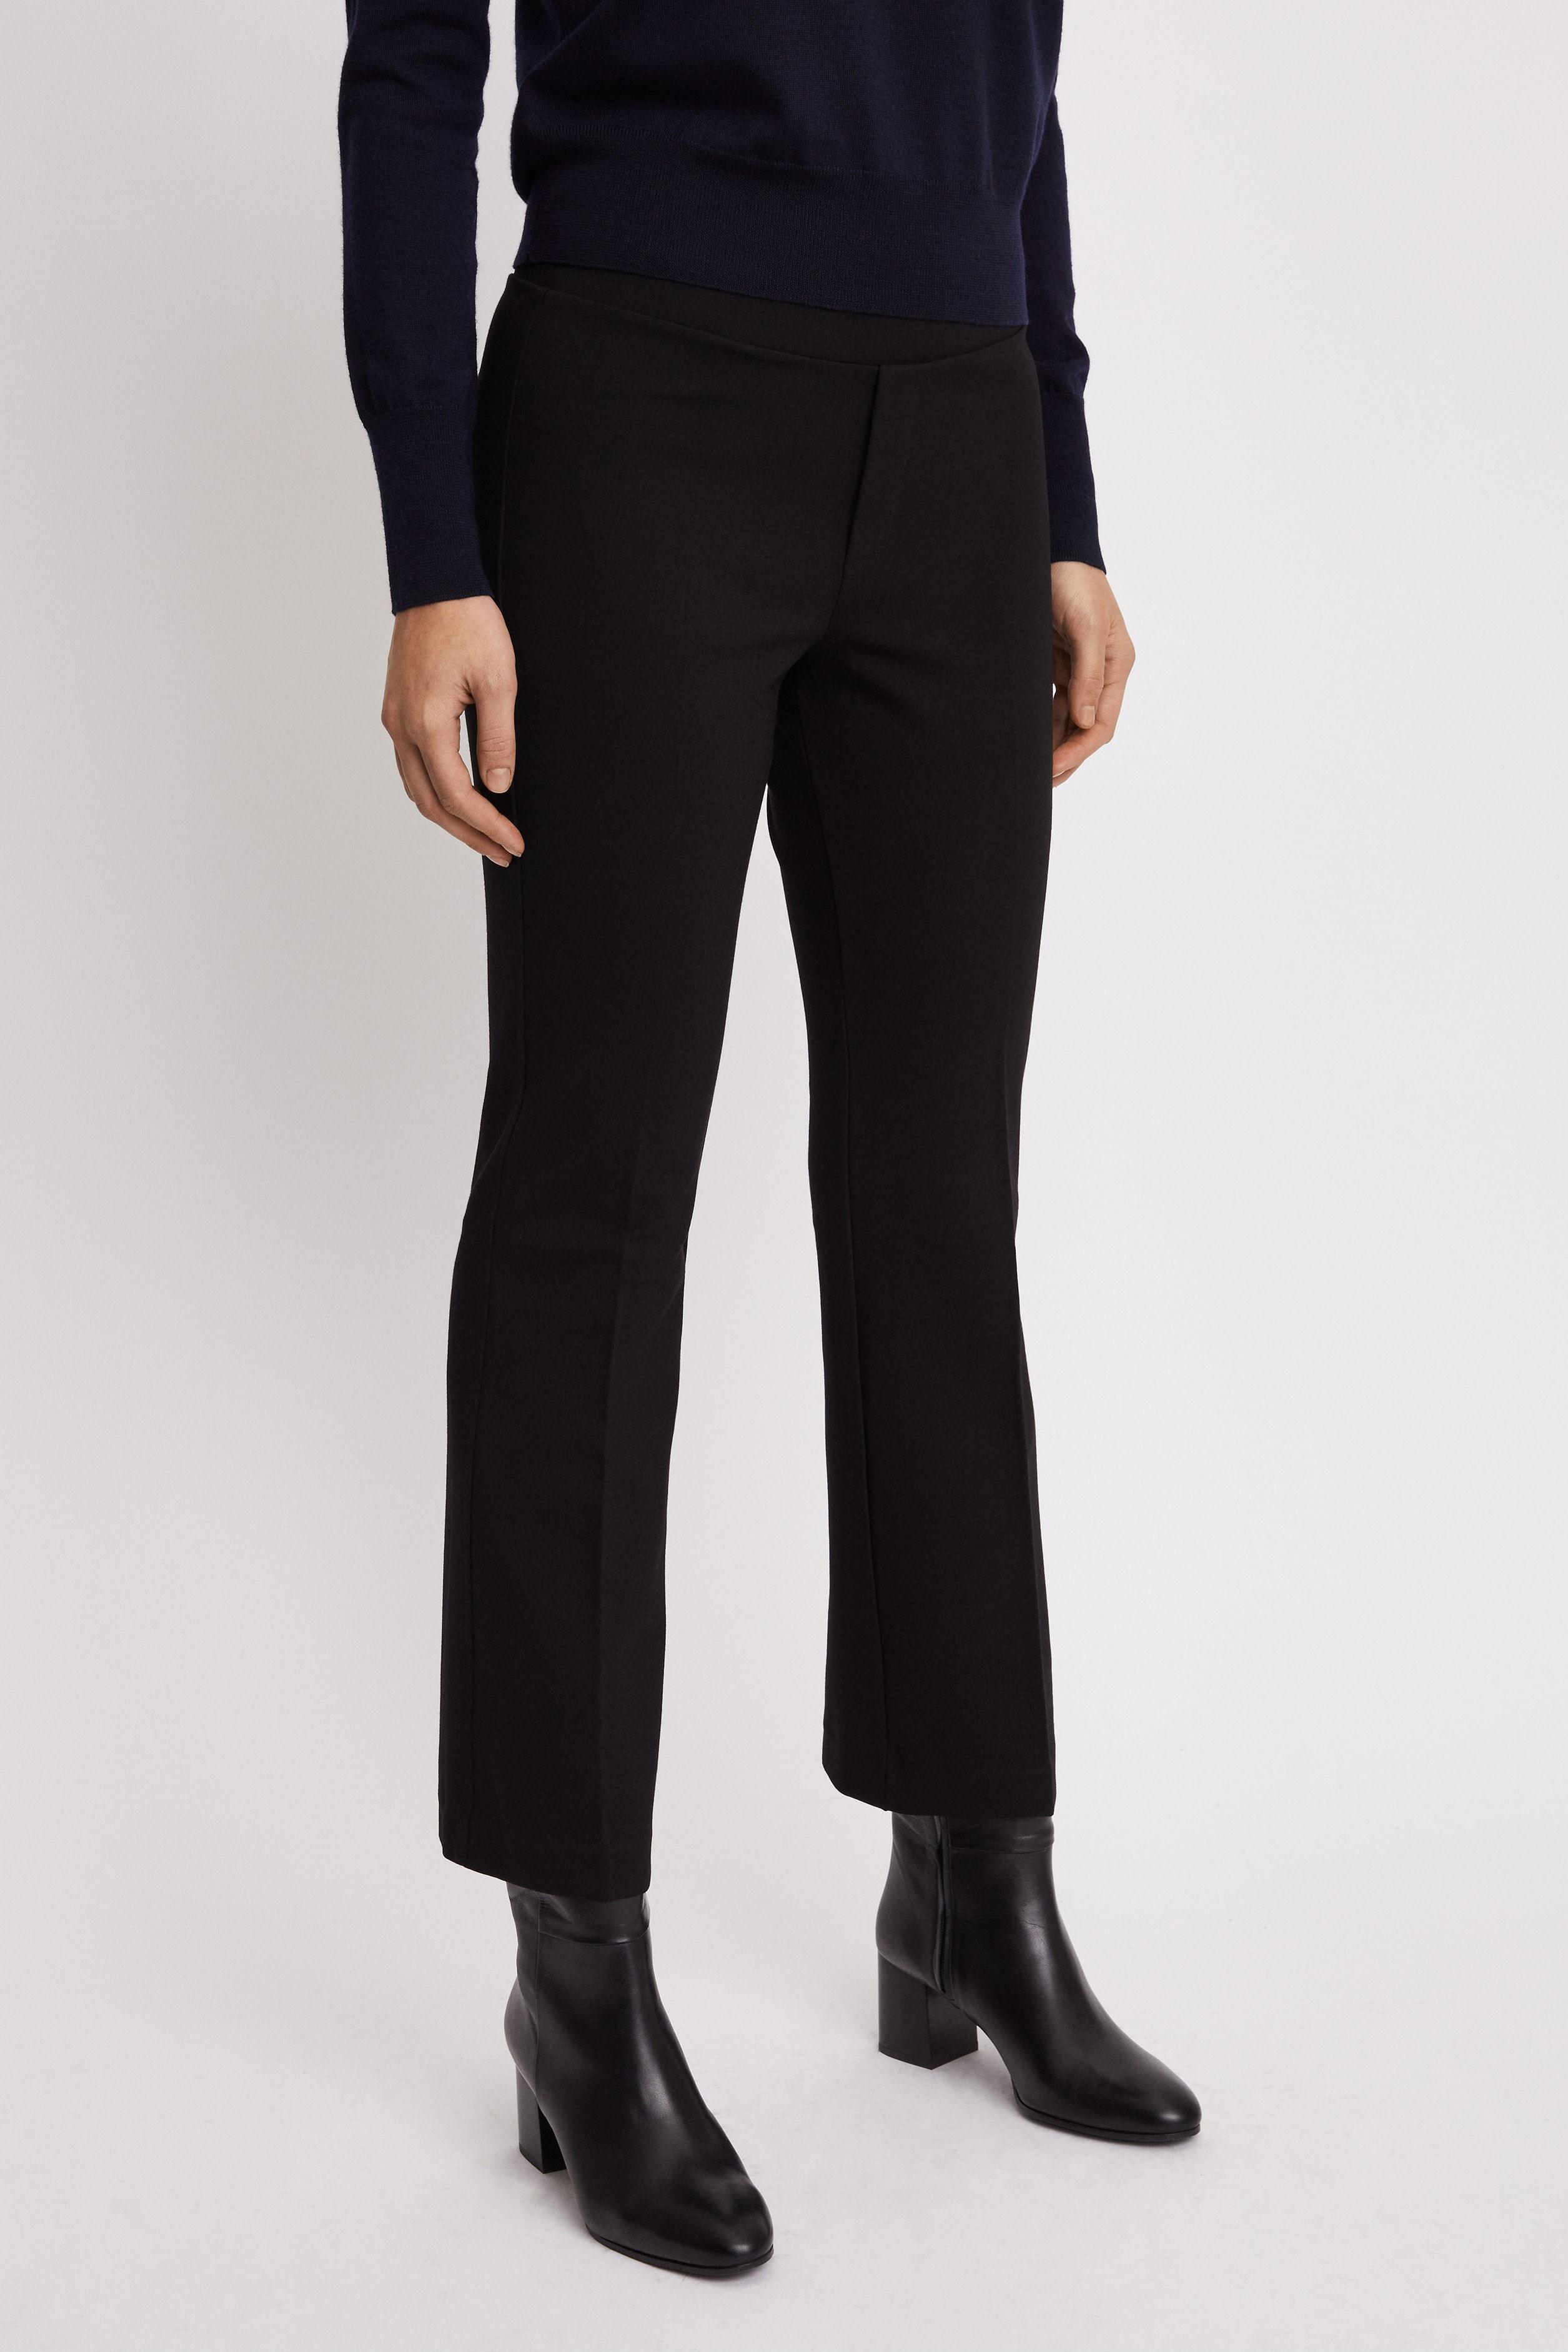 Cotton Poe Cropped Jersey Pant in Black 